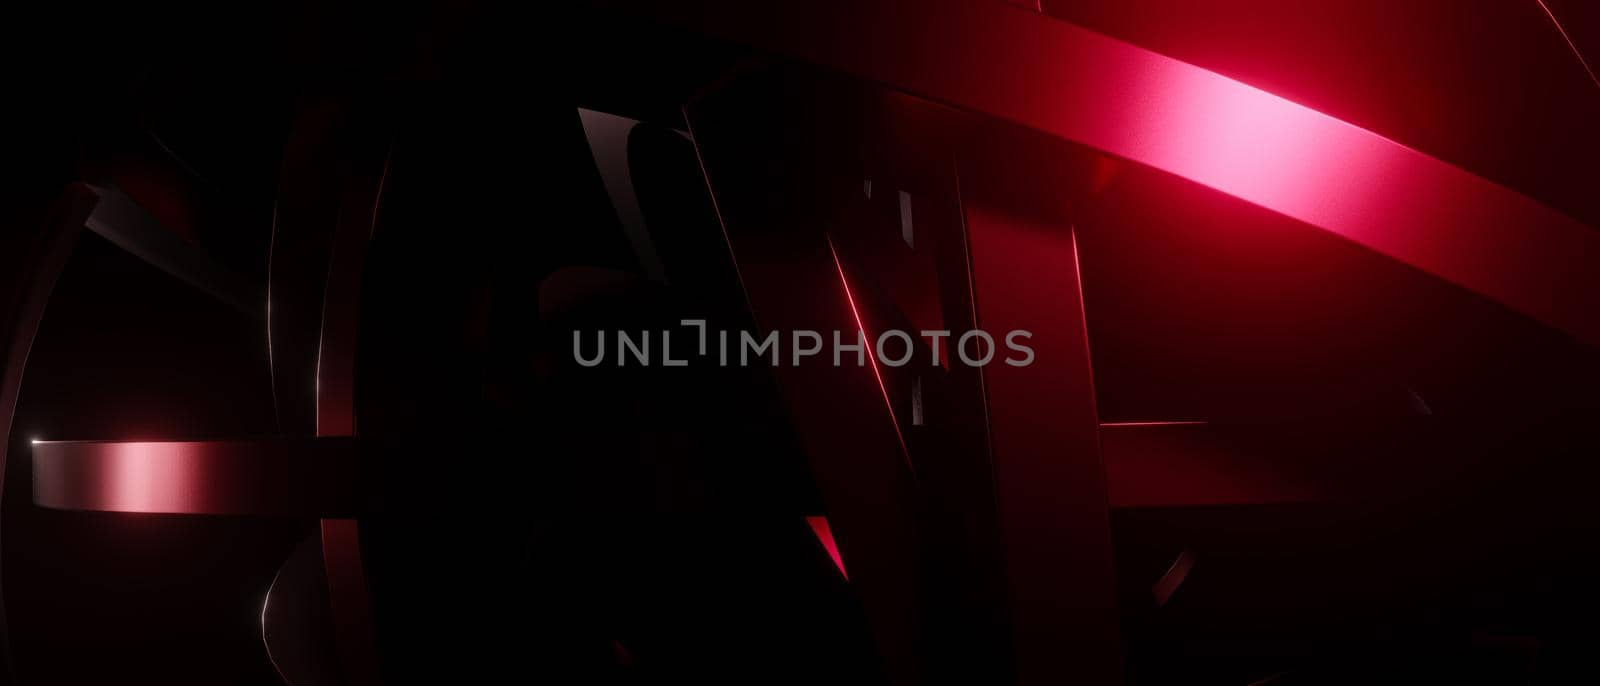 Modern Overlapping Metallic Surfaces Serious Black Abstract Background 3D Rendering by yay_lmrb